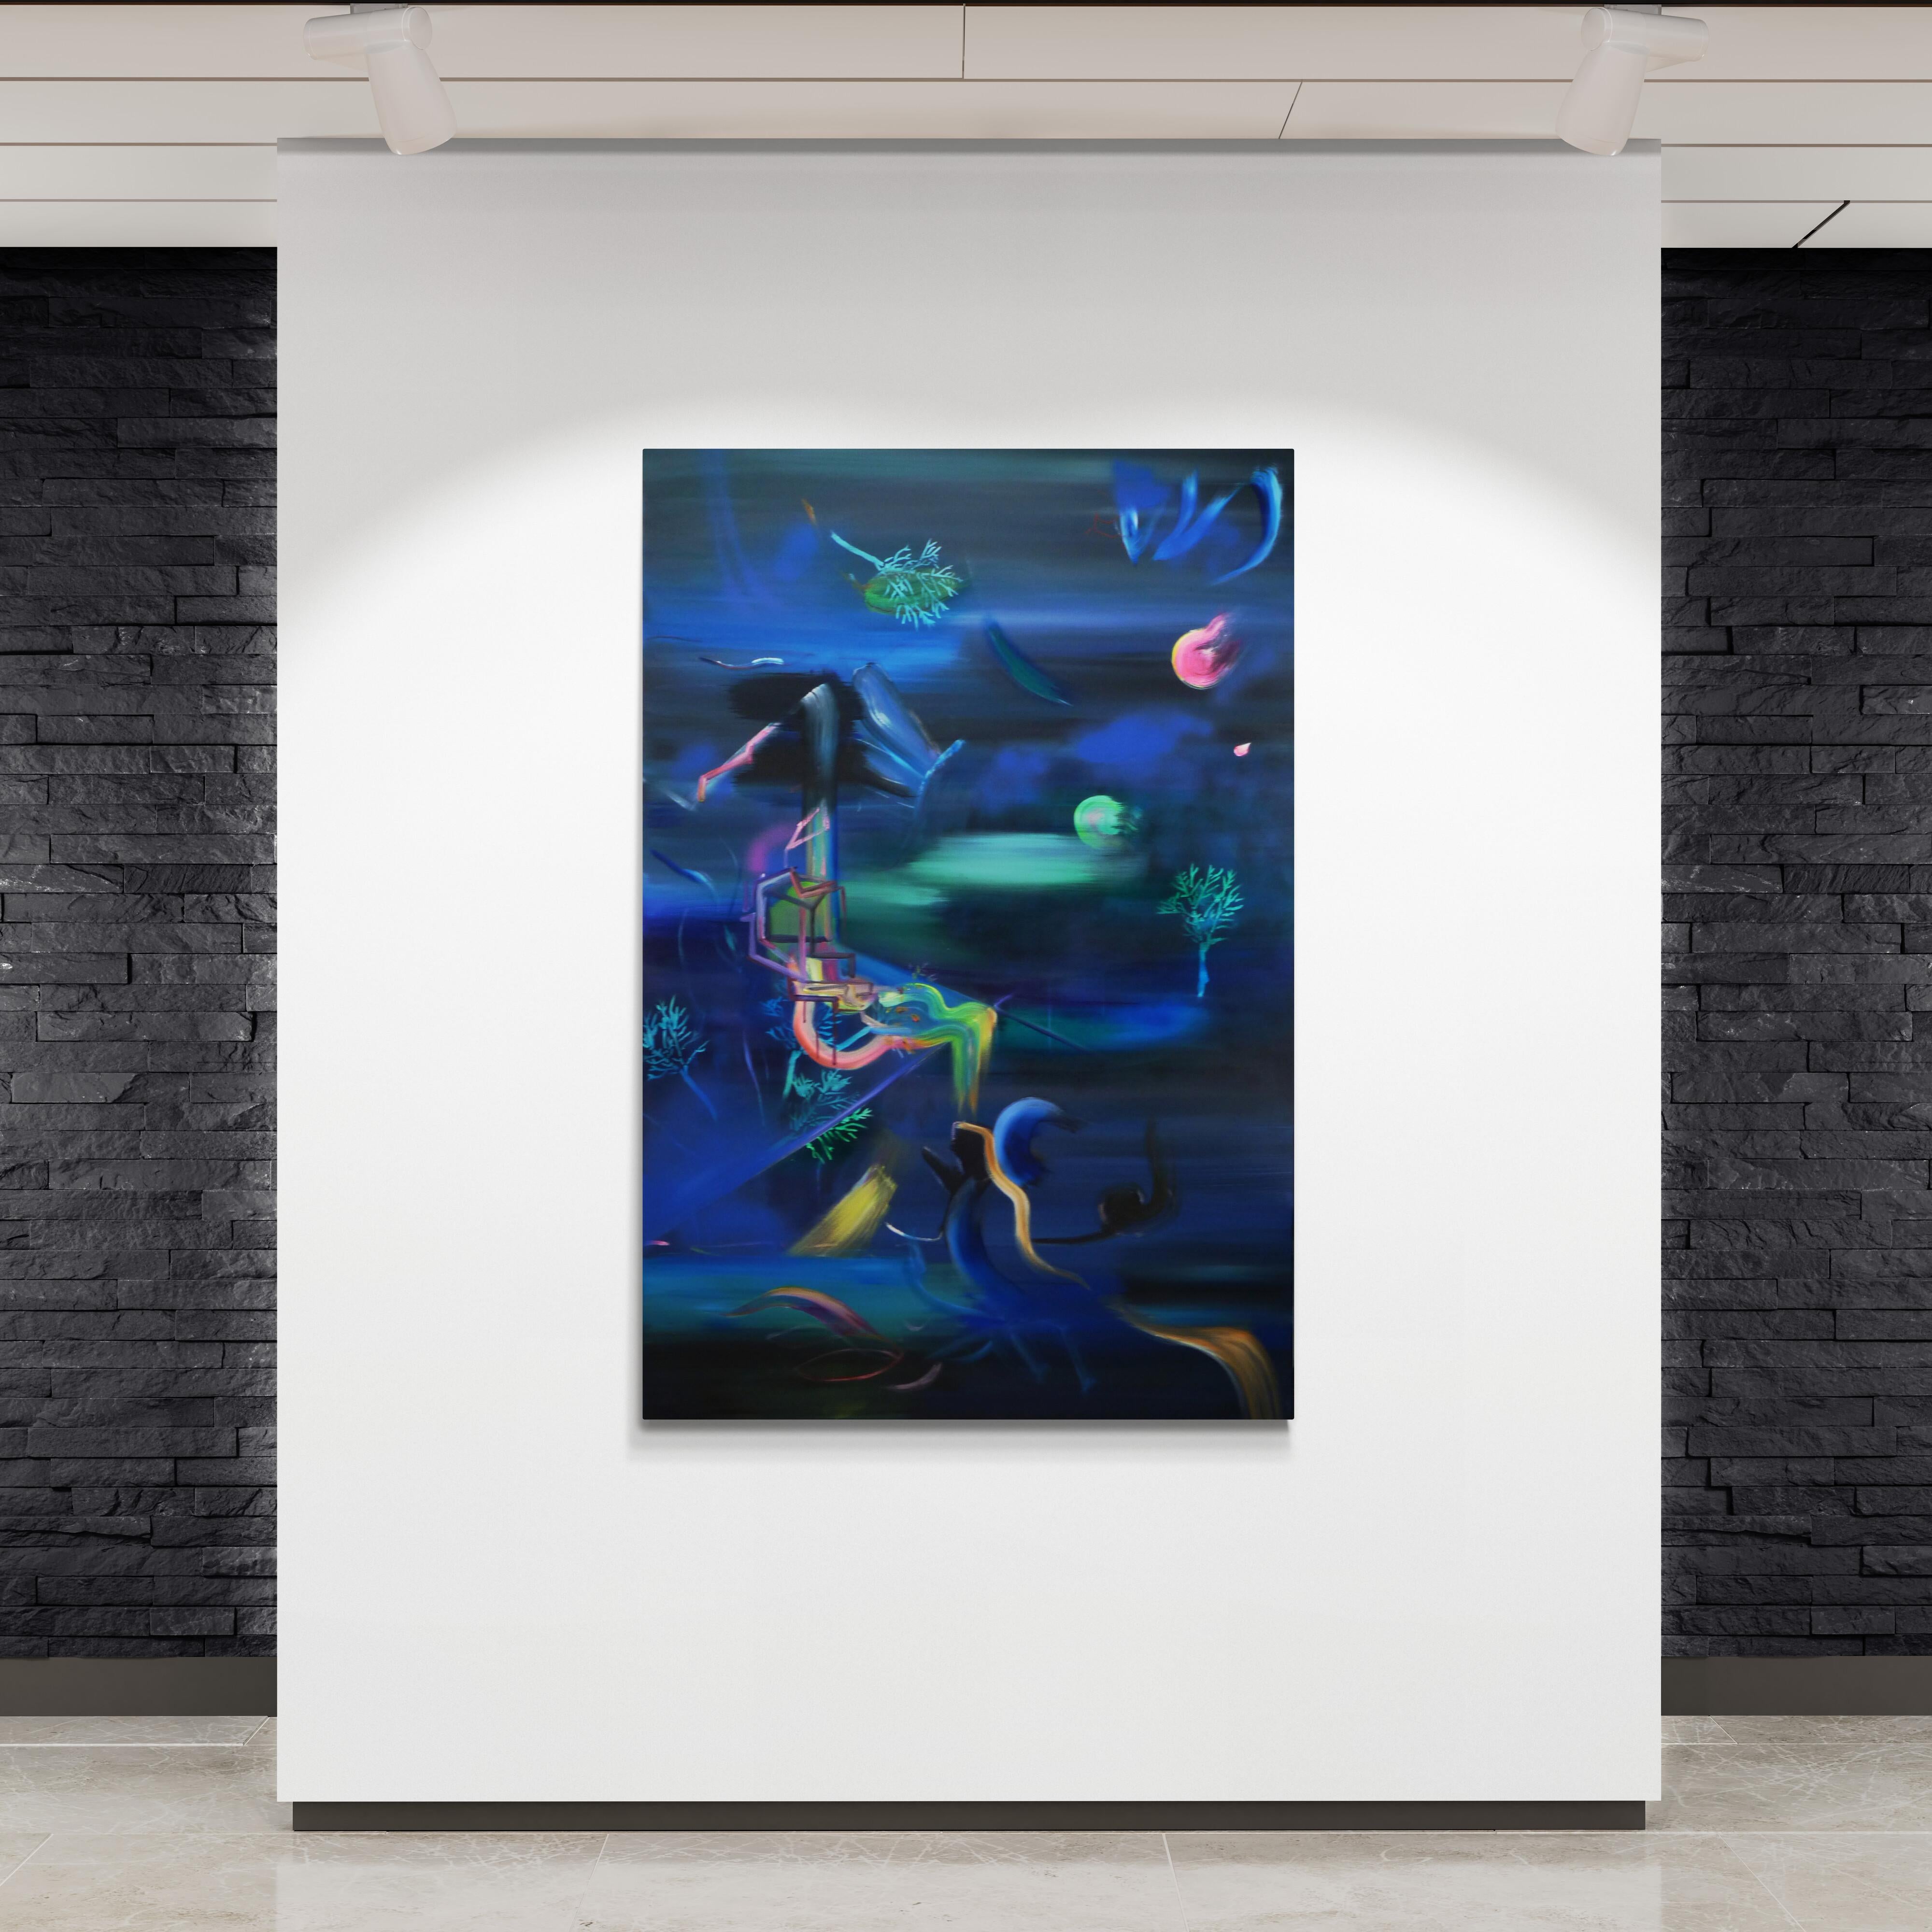 Night Air Fills My Soul with Kindness - Expressionism, Underwater Sea Landscape - Painting by Justyna Pennards-Sycz